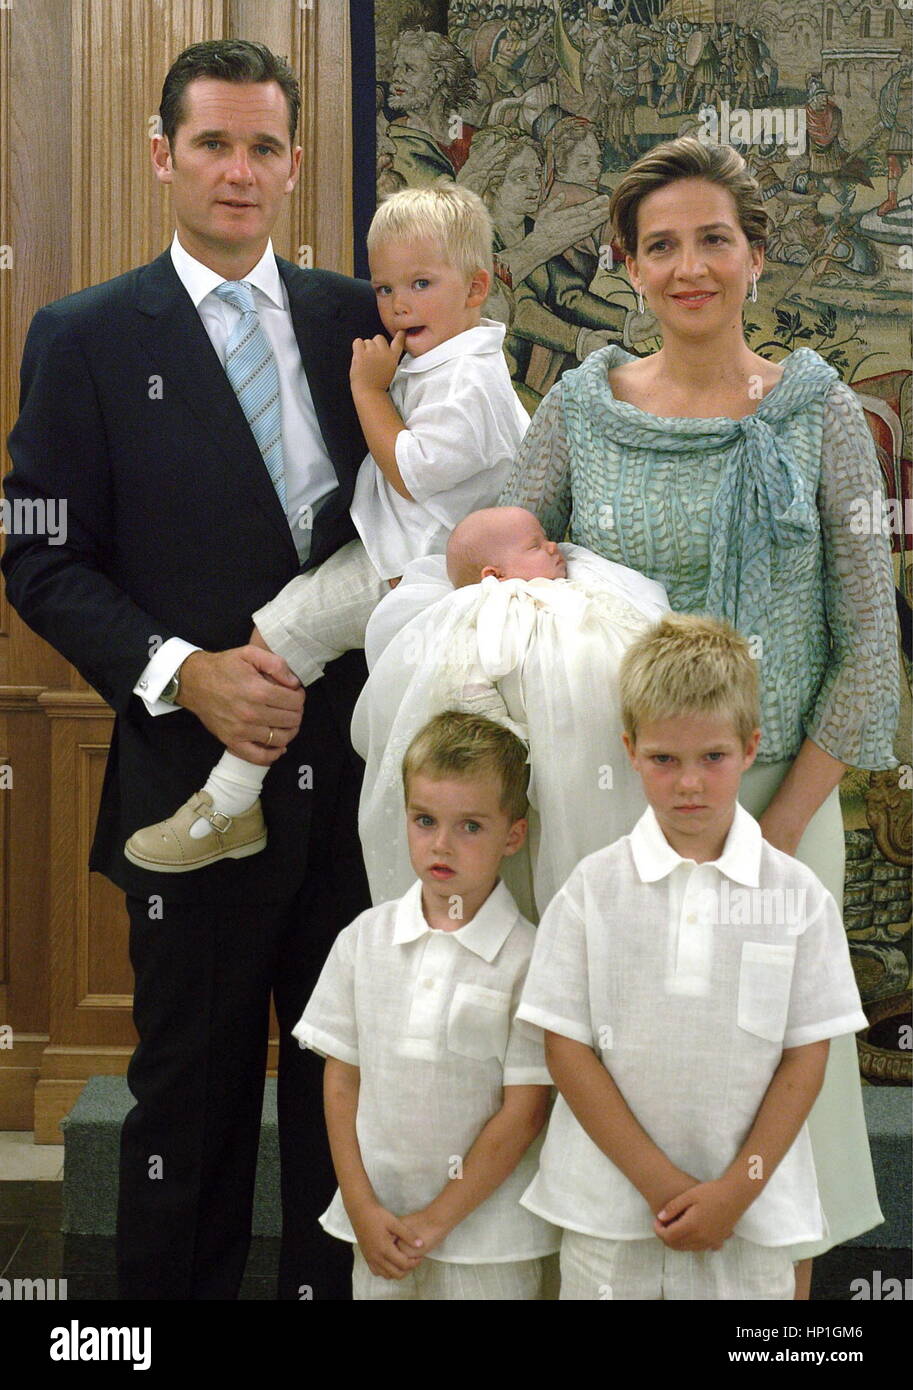 FILE Iñaki Urdangarin and Cristina de Borbon with sons during Irene  Urdangarin's baptism Iñaki Urdangarin has been sentenced to 6 years and 3  months for the Noos case on Friday, February 17,